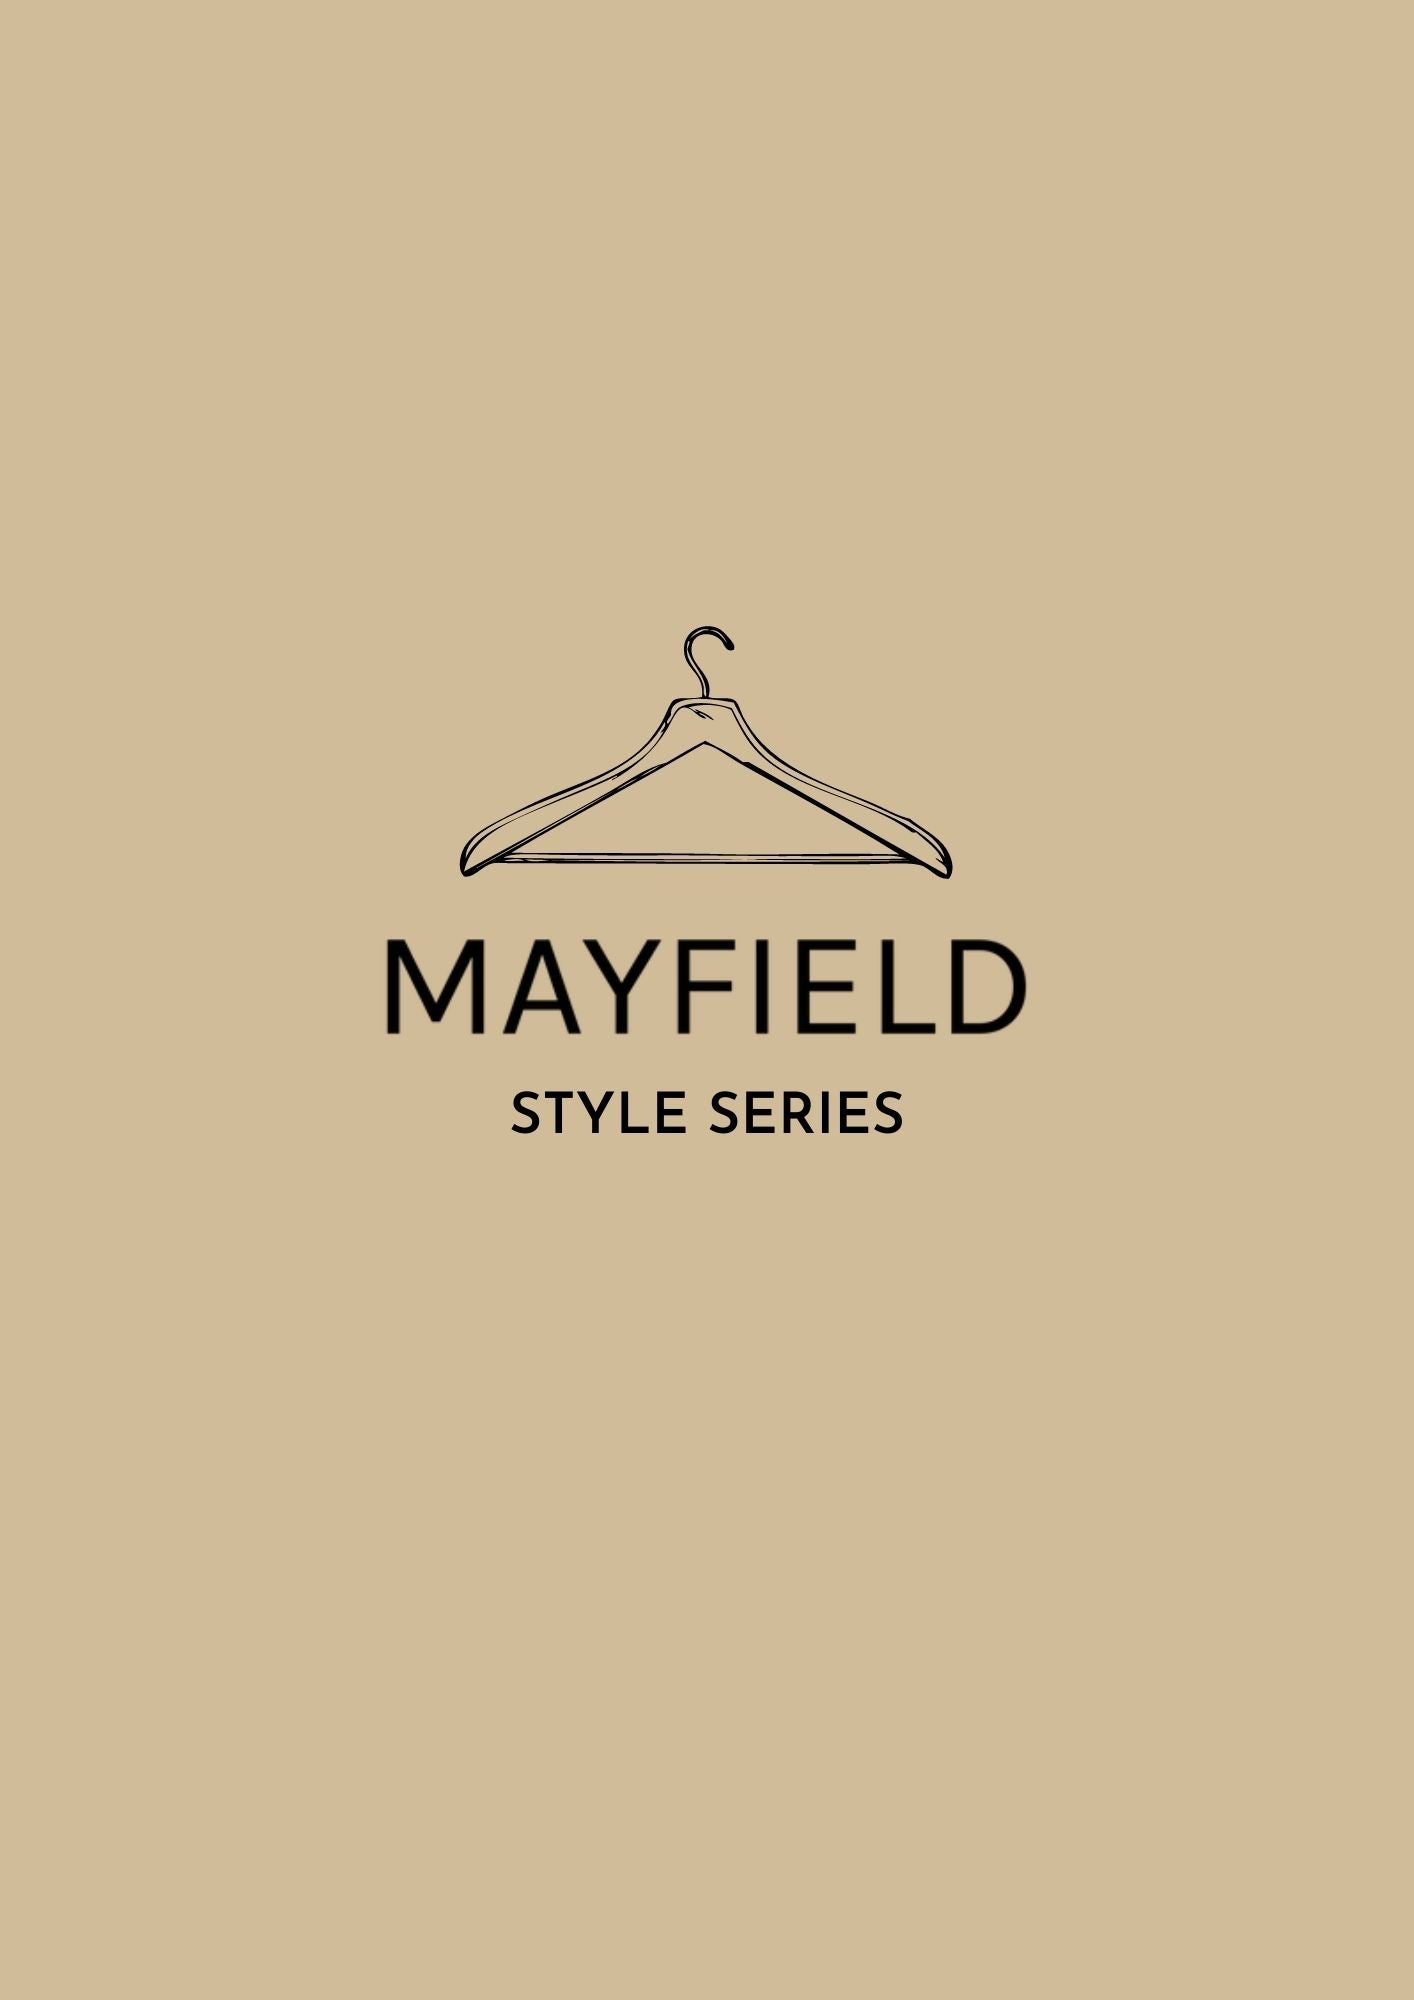 YOU'RE INVITED // MAYFIELD STYLE SERIES